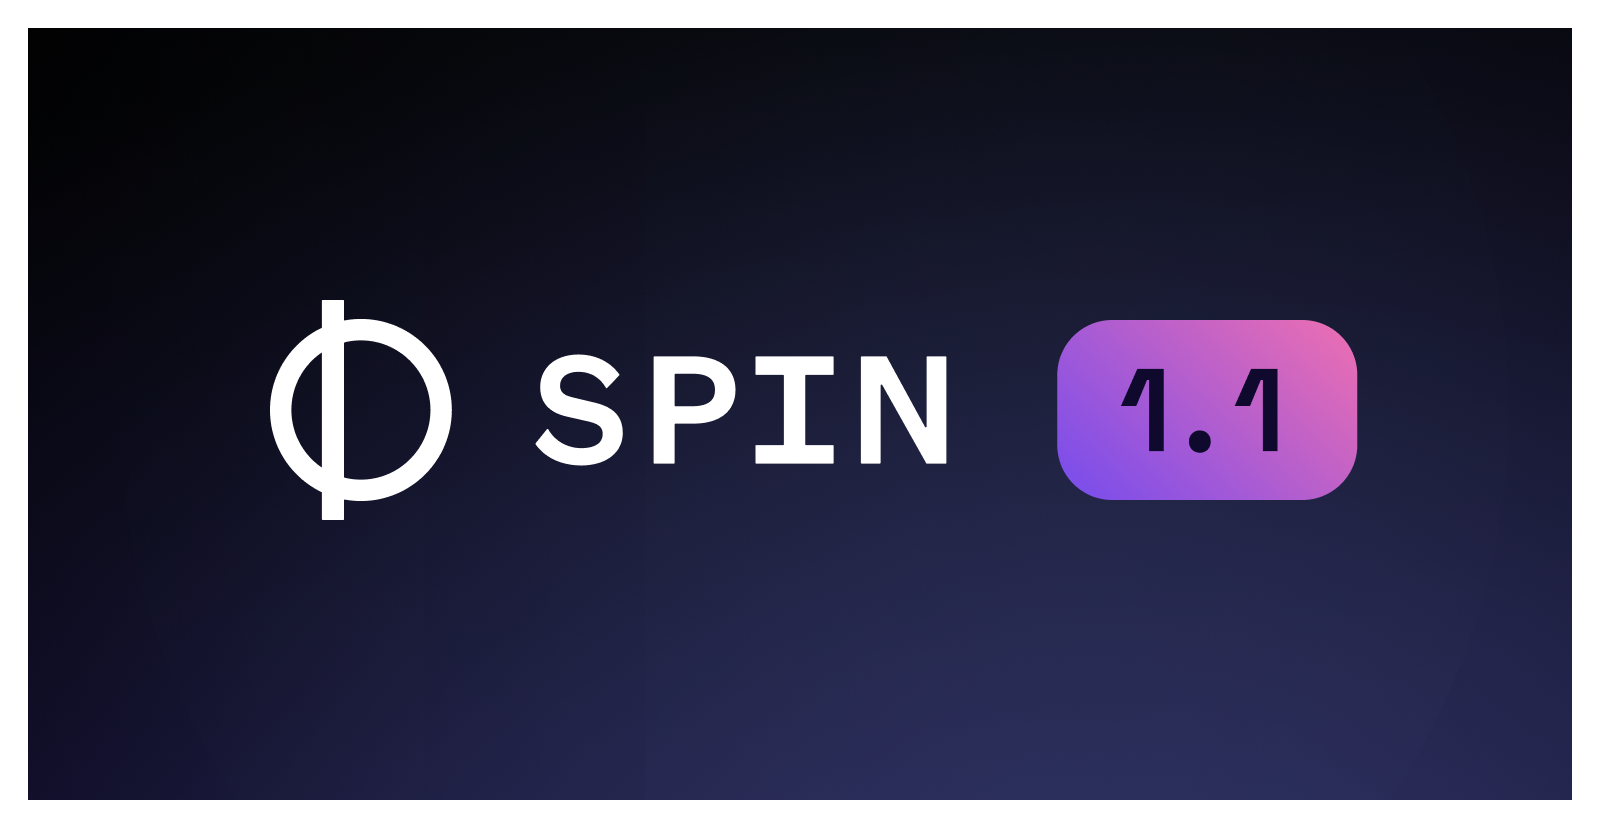 Introducing Spin 1.1